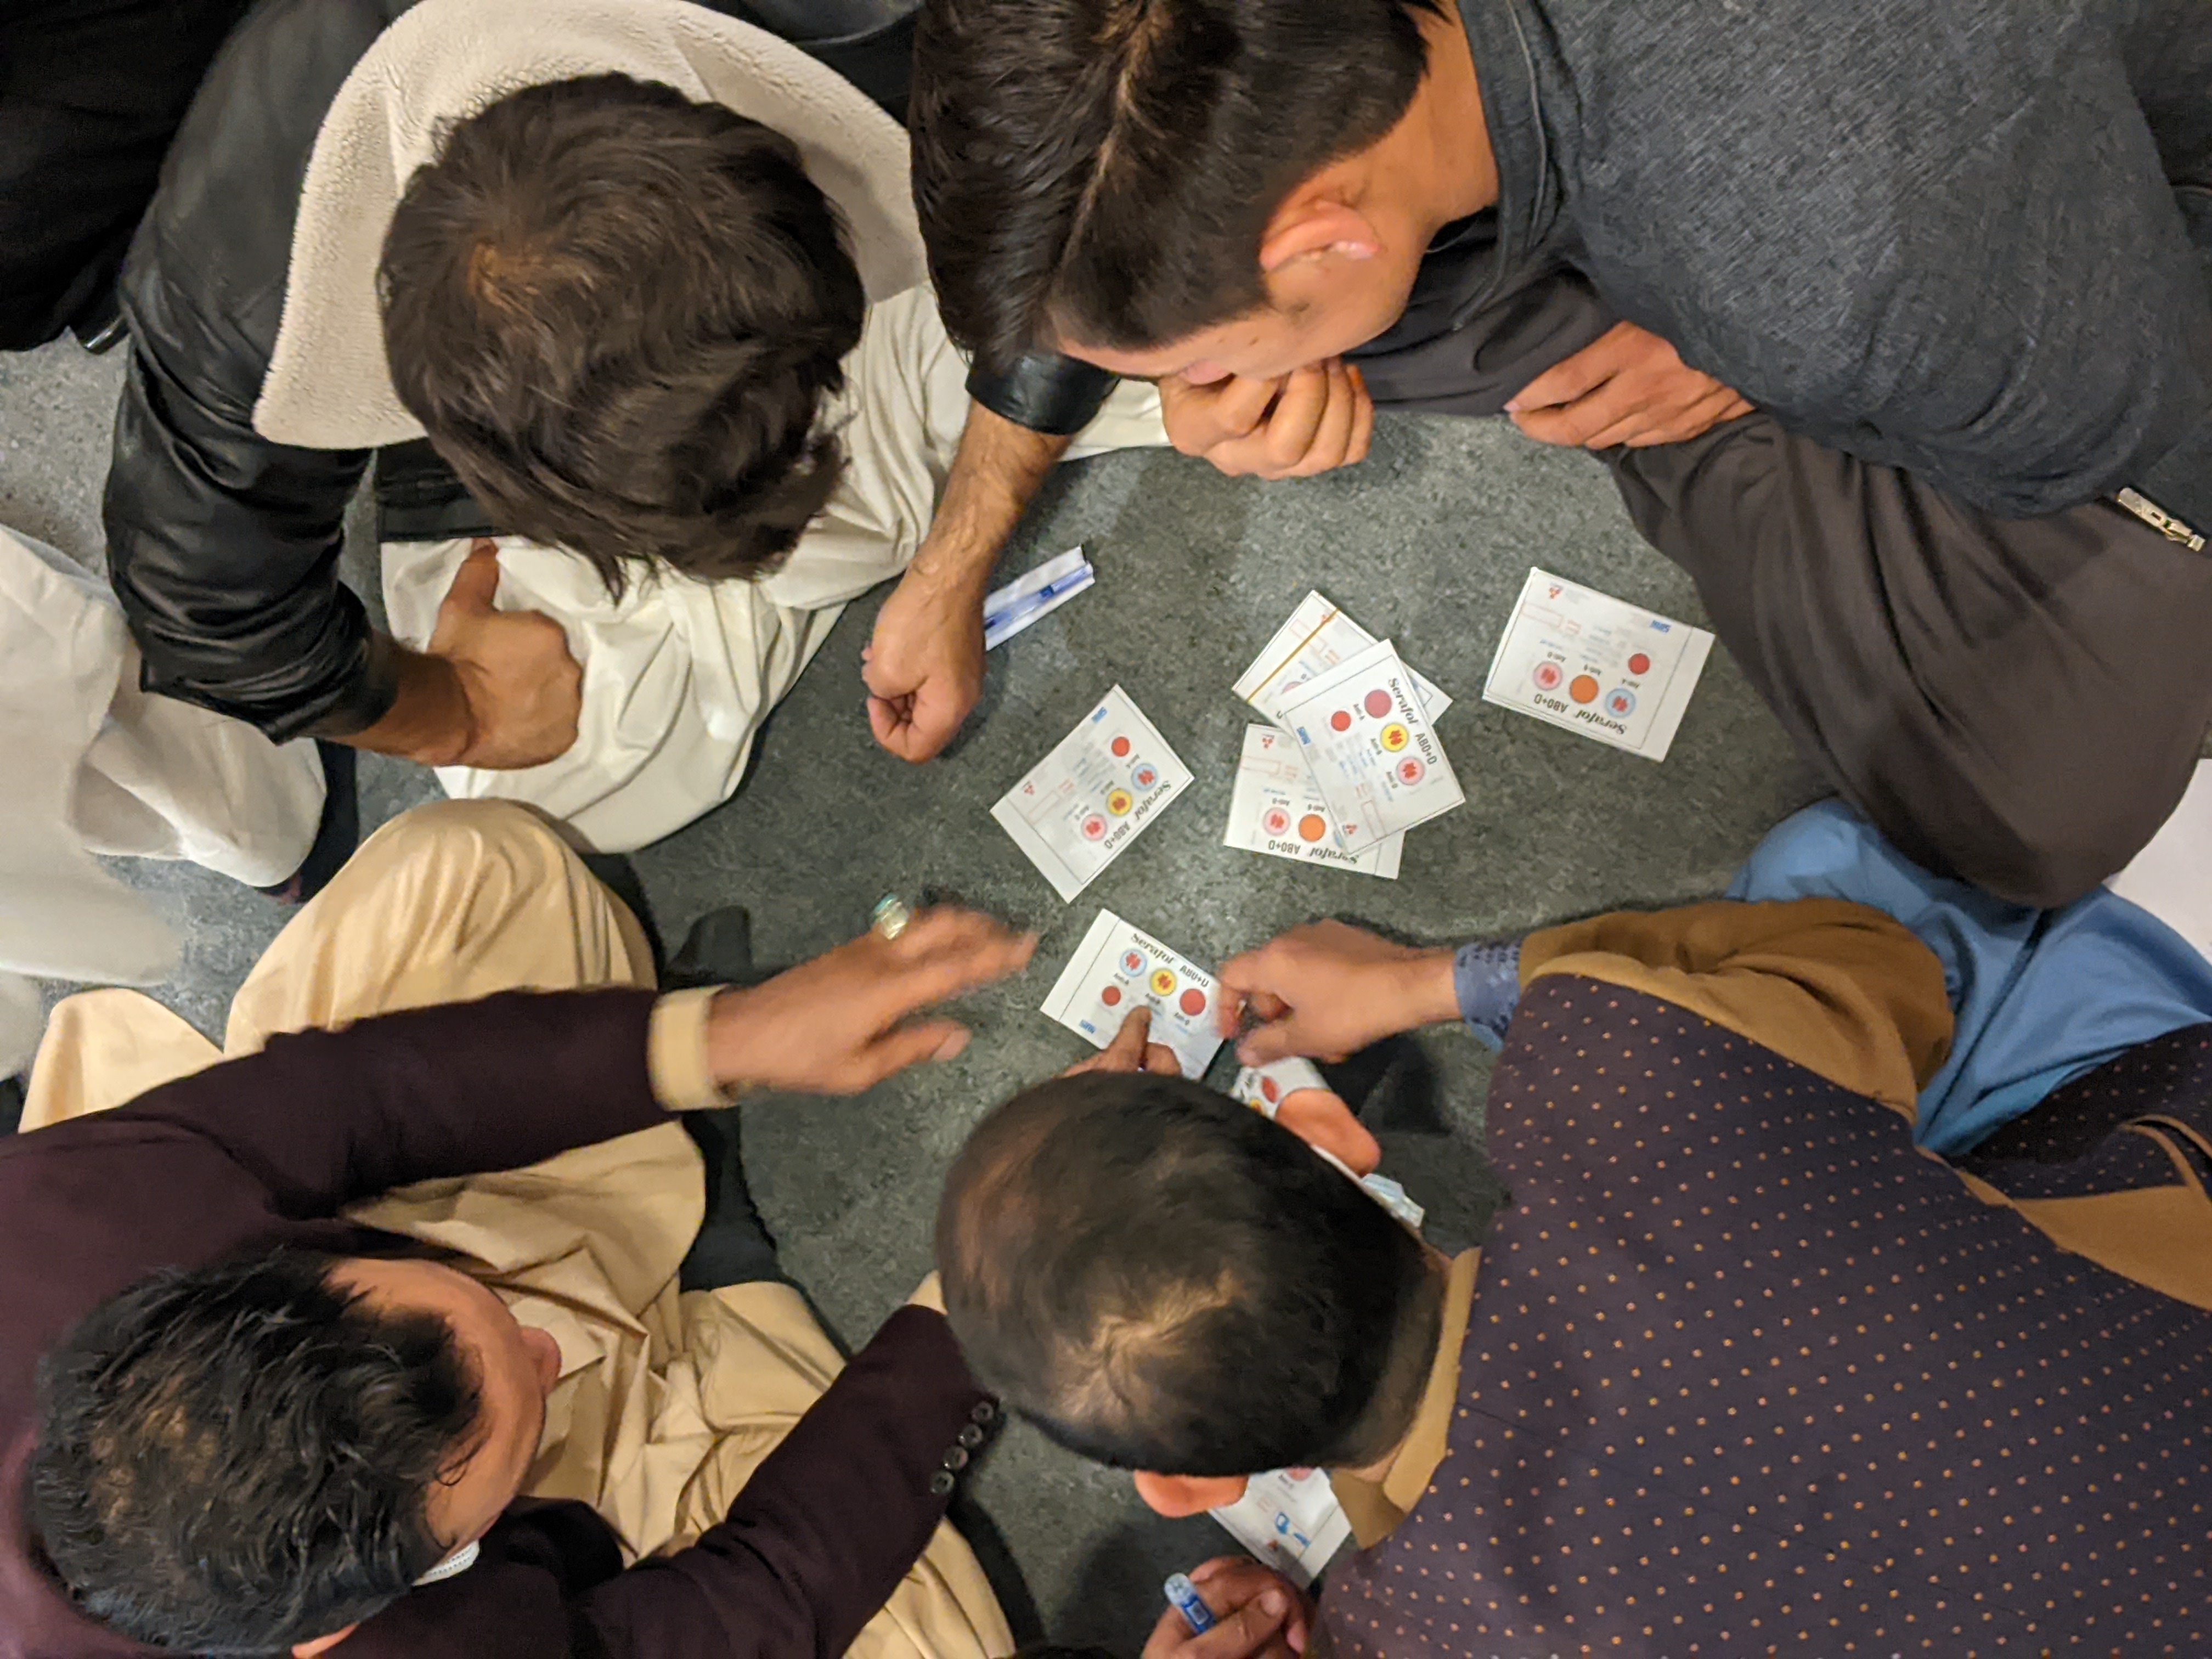 Staff participate in a training session at the Herat regional hospital